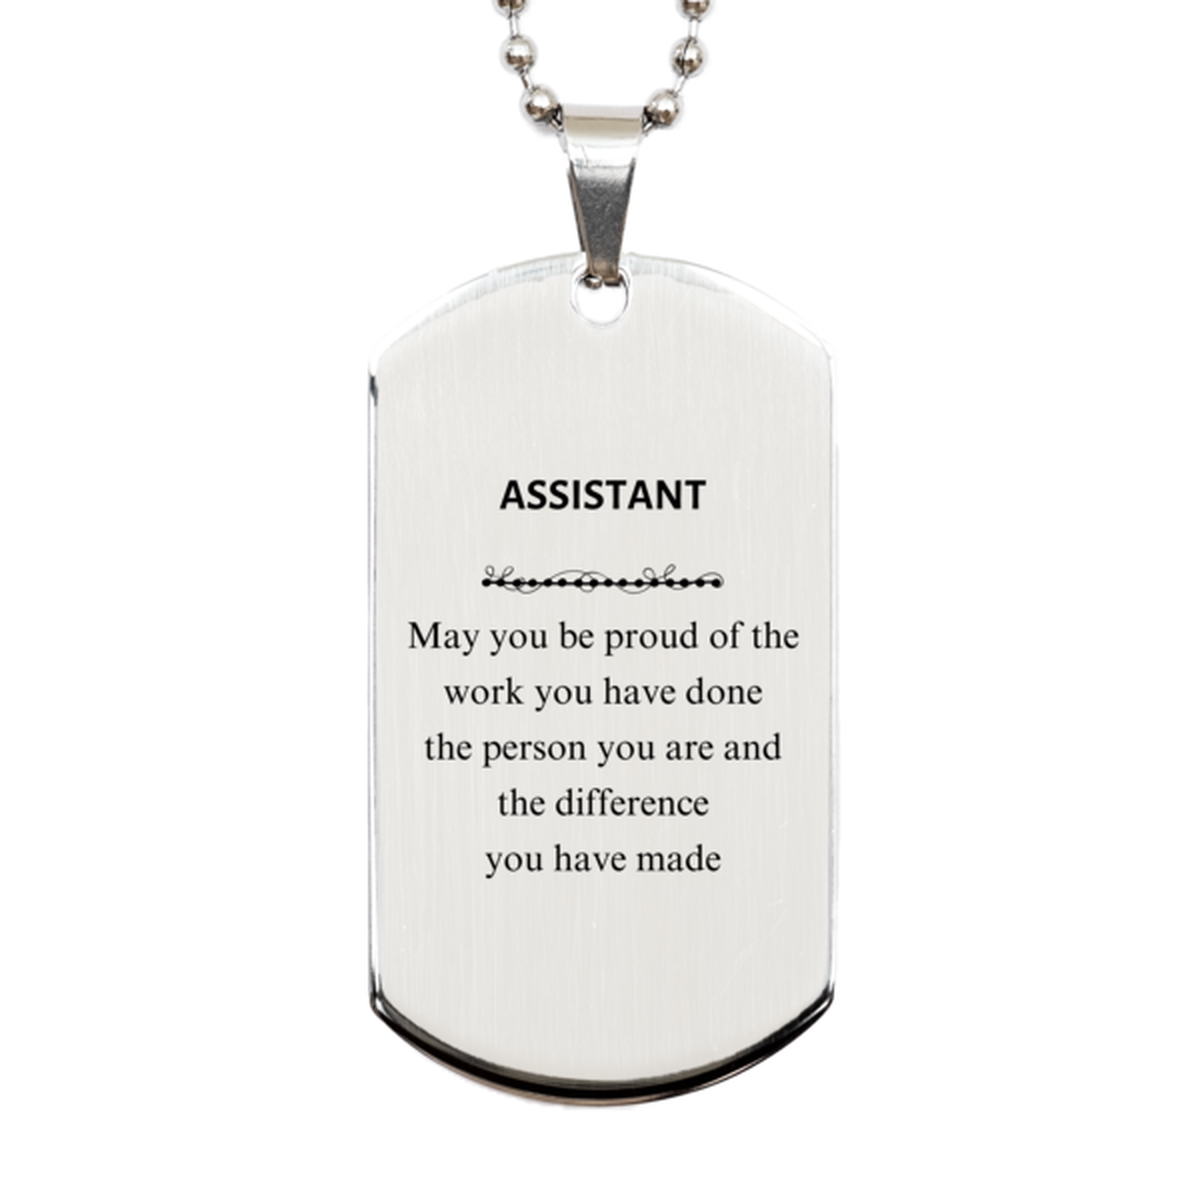 Assistant May you be proud of the work you have done, Retirement Assistant Silver Dog Tag for Colleague Appreciation Gifts Amazing for Assistant